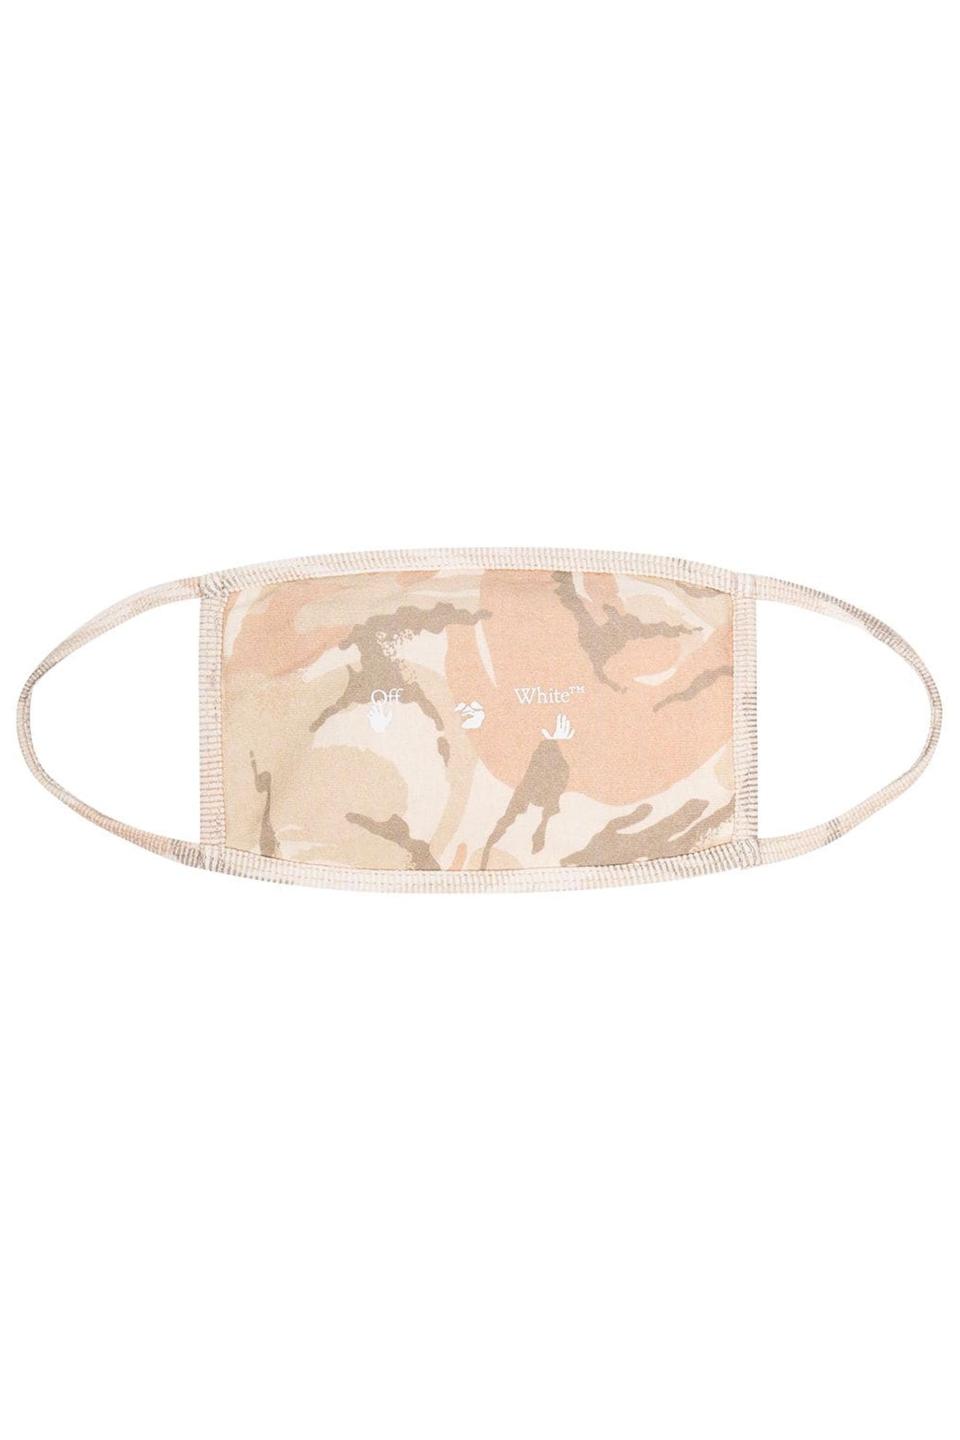 5) Off-White x Browns 50 camouflage face mask